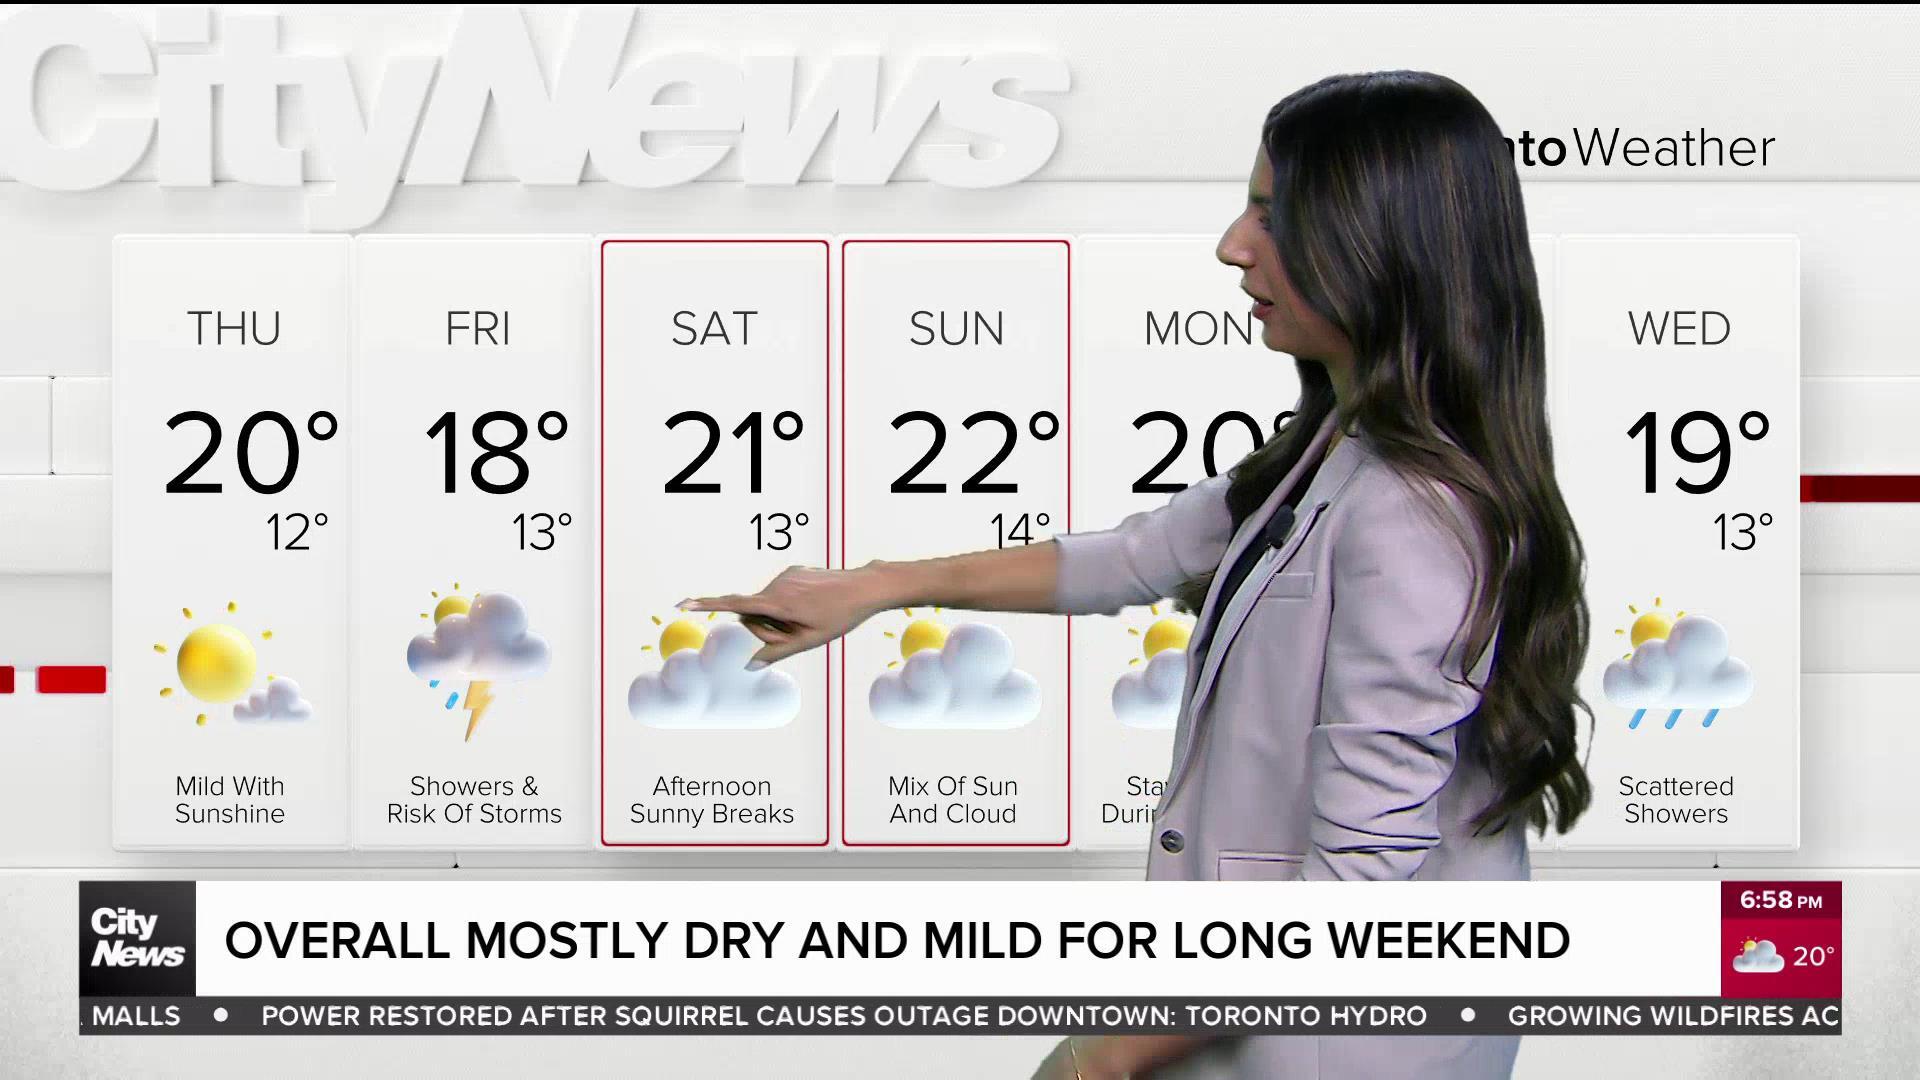 Mostly dry and mild long weekend ahead